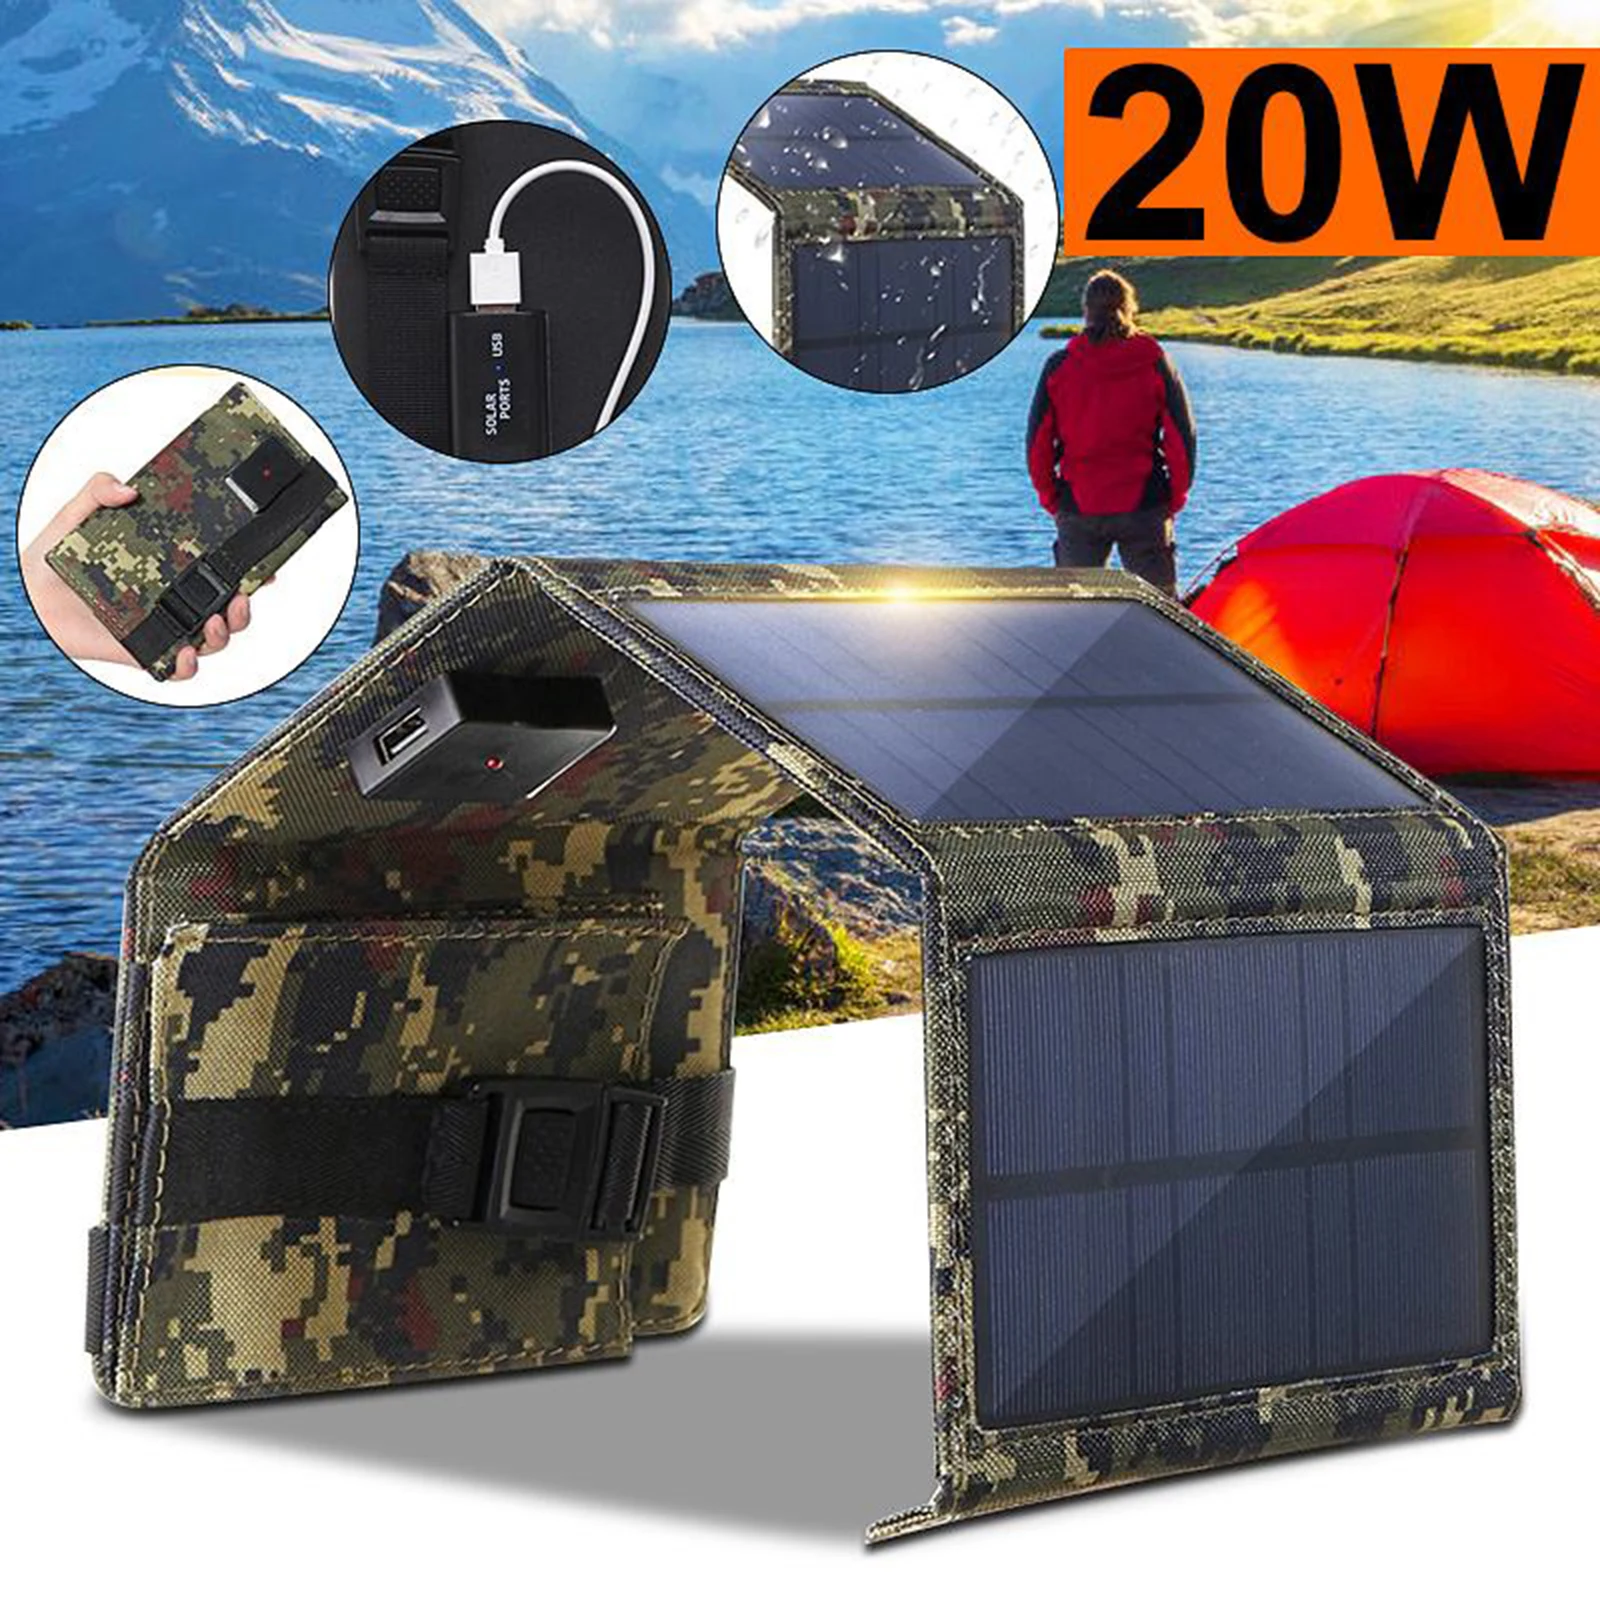 Waterproof 50W Foldable Solar Panel 5V USB Sunpower Solar Cell Bank Pack Mobile Phone Battery Charger for Outdoor Camping Hiking